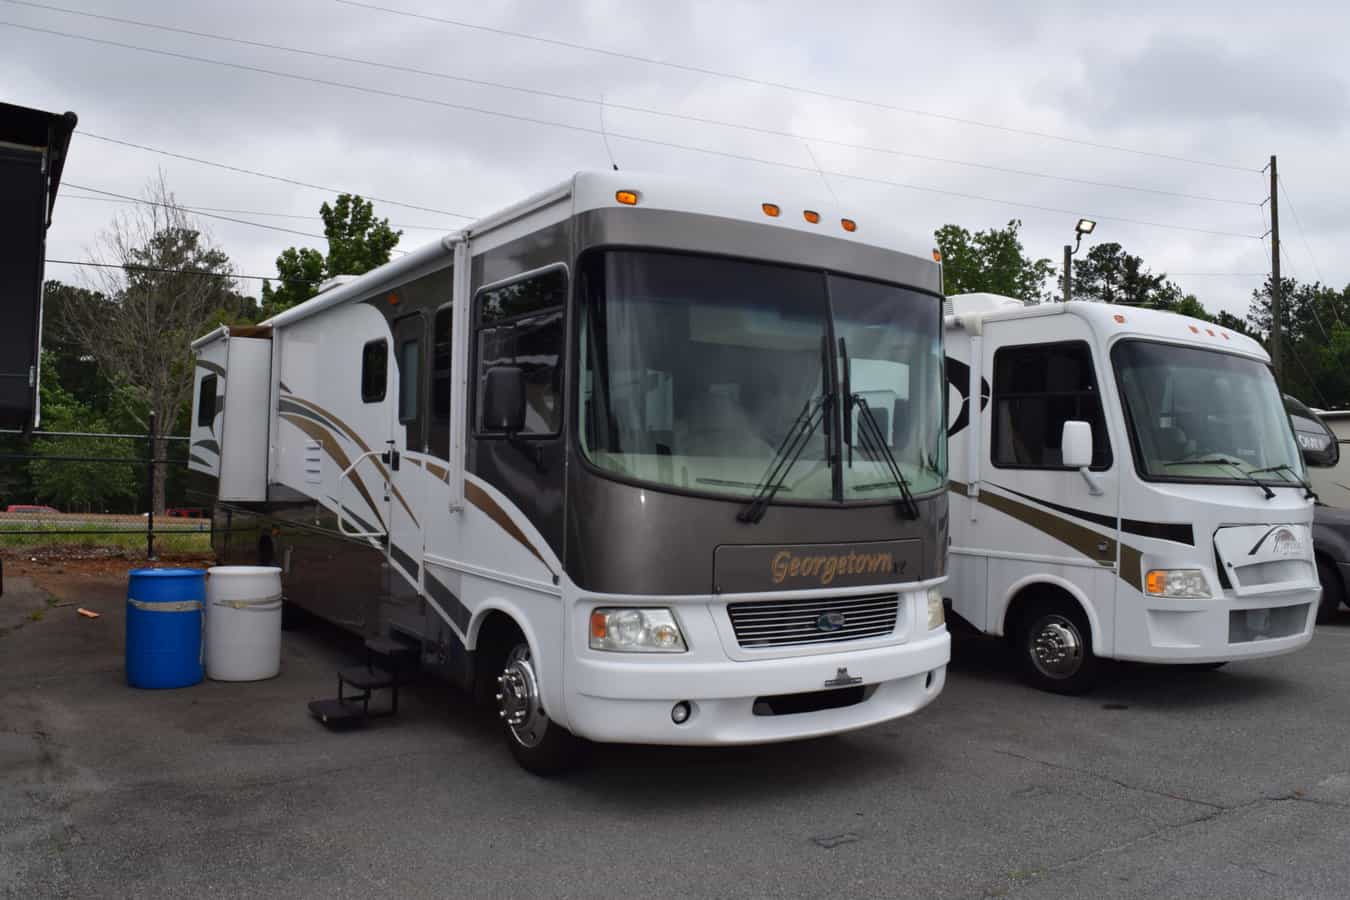 USED 2007 Forest River GEORGETOWN XL 370TSF